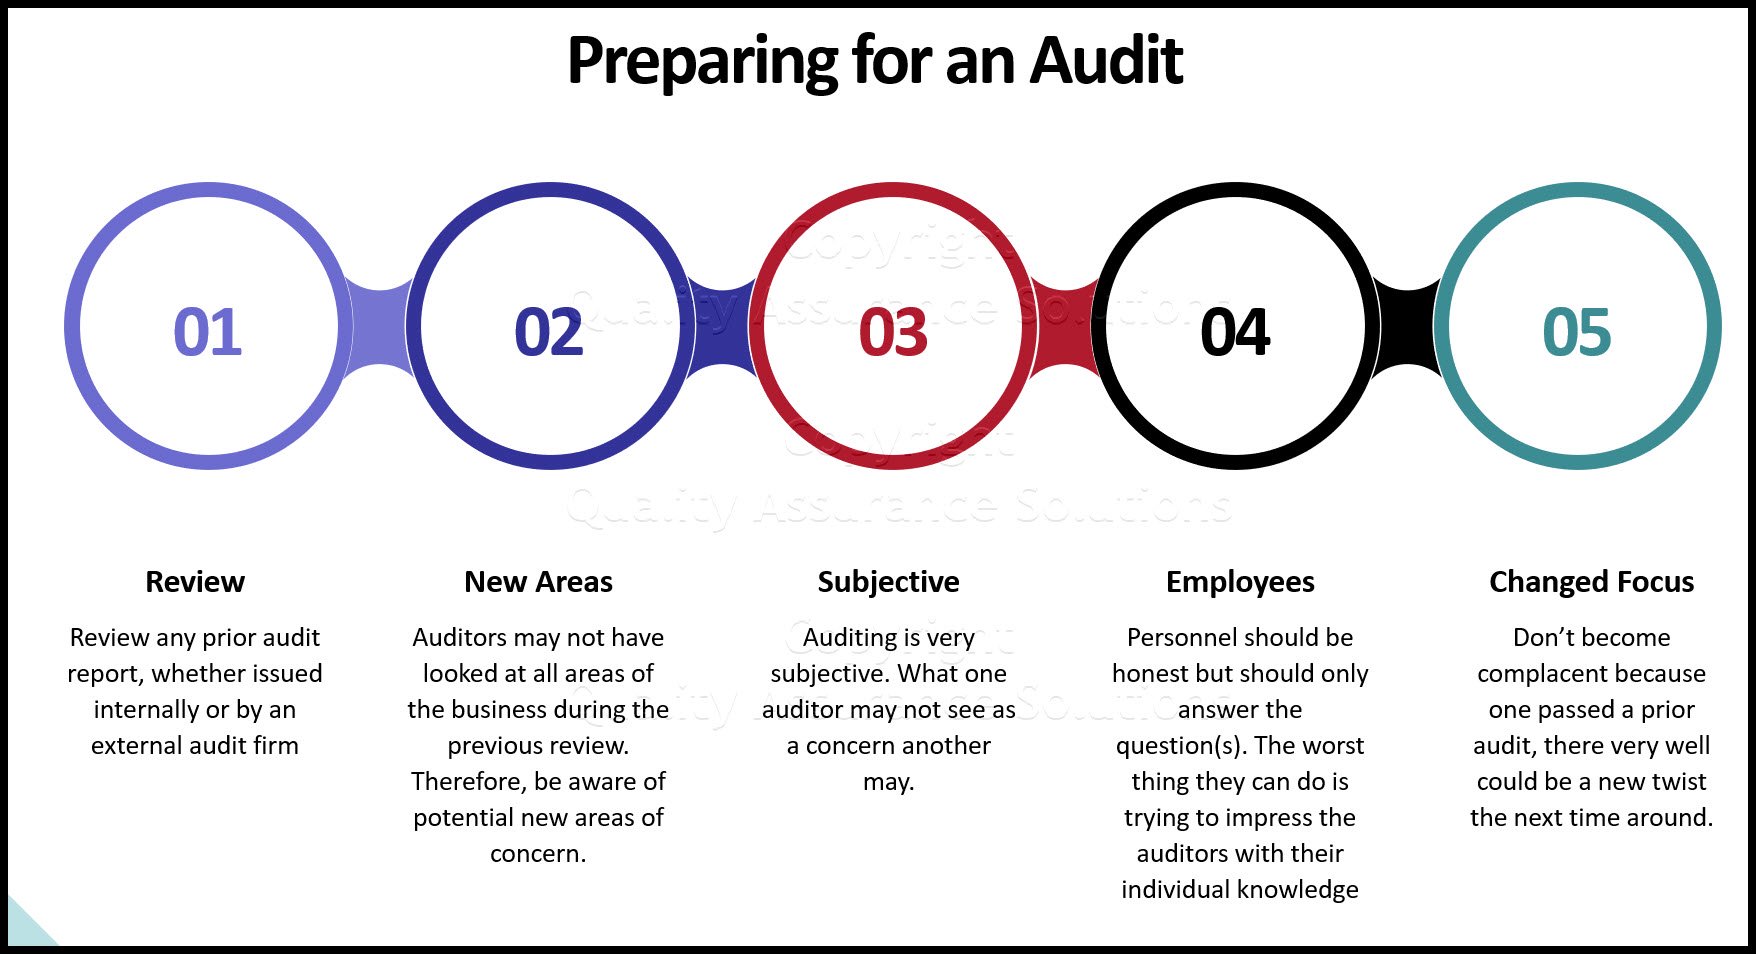 Review this IT audit tool and guide. We cover scope, physical, access control, data and applications security issues. Learn what to look for and questions to ask during the audit. We also cover what to do prior and during an IT audit. 